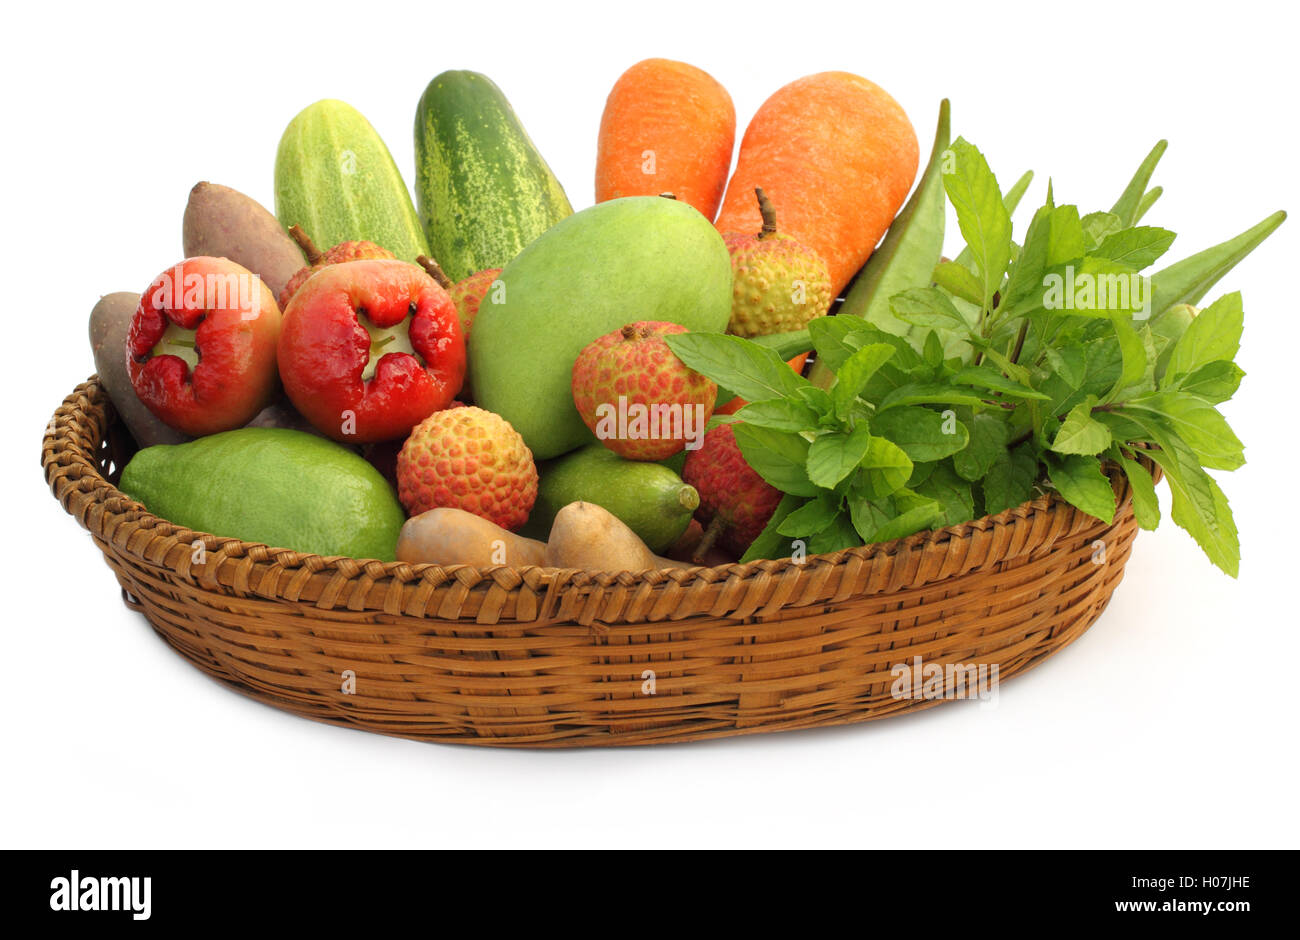 Tropical fruits and vegetables Stock Photo